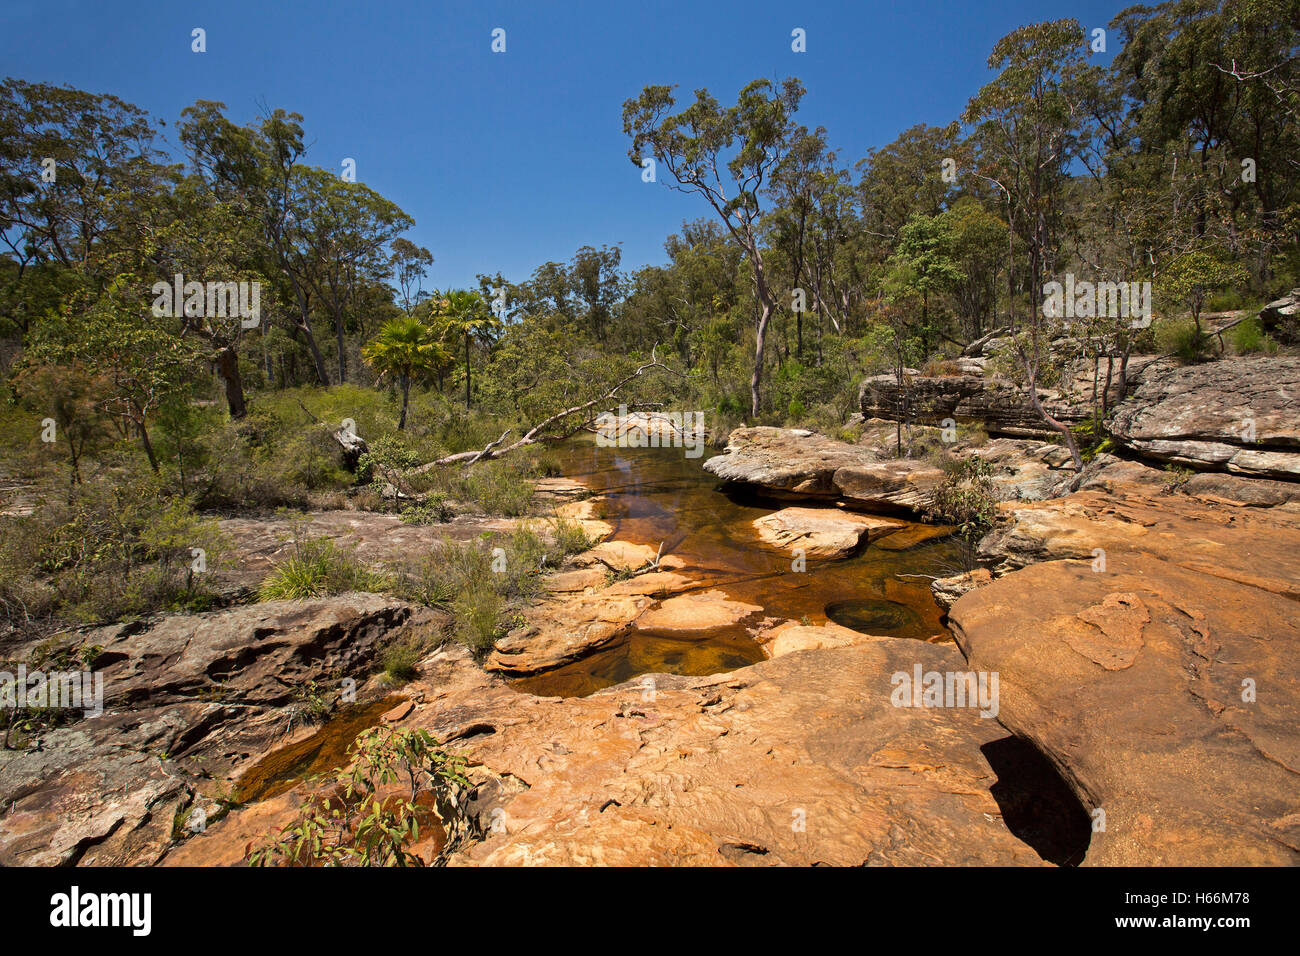 Aust landscape dominated by eroded slabs of red sandstone rock in bed of ancient stream bordered by eucalypt forest & boulders Stock Photo